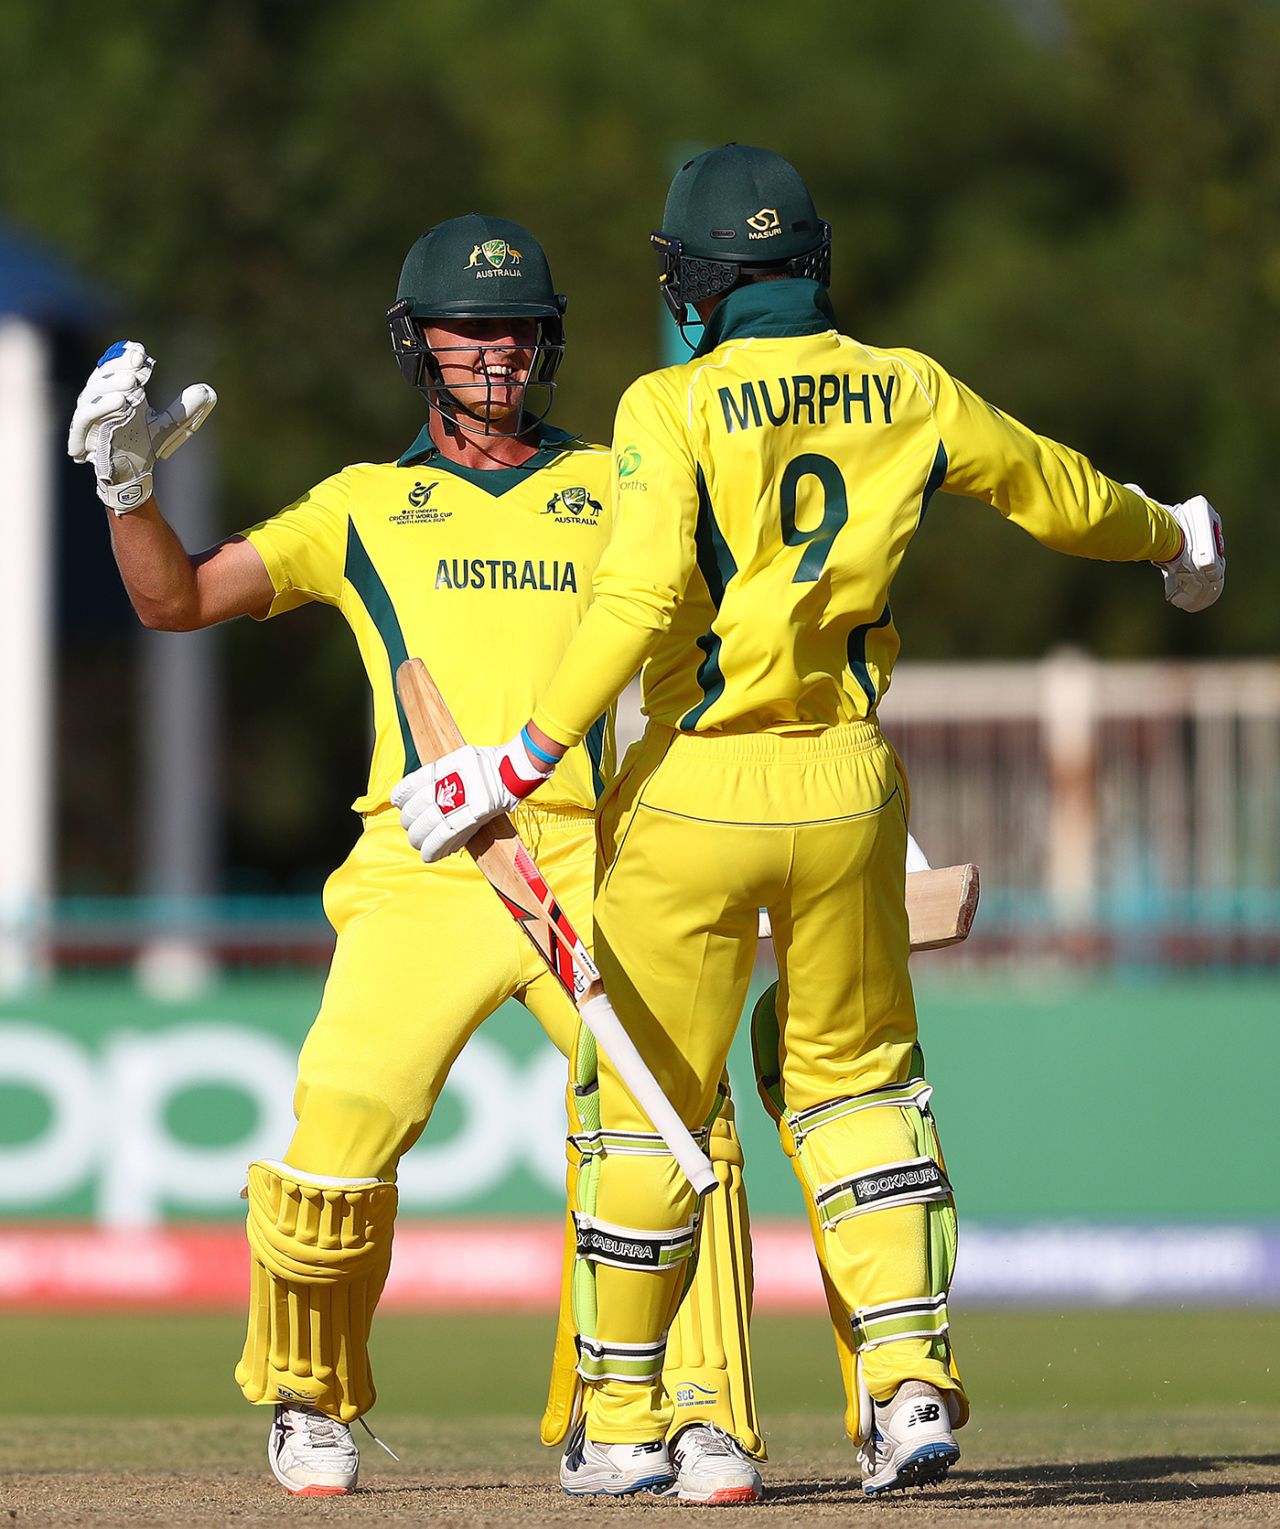 Connor Sully and Todd Murphy's unbeaten ninth-wicket stand won it for Australia, England vs Australia, U-19 World Cup, Kimberley, January 23, 2020